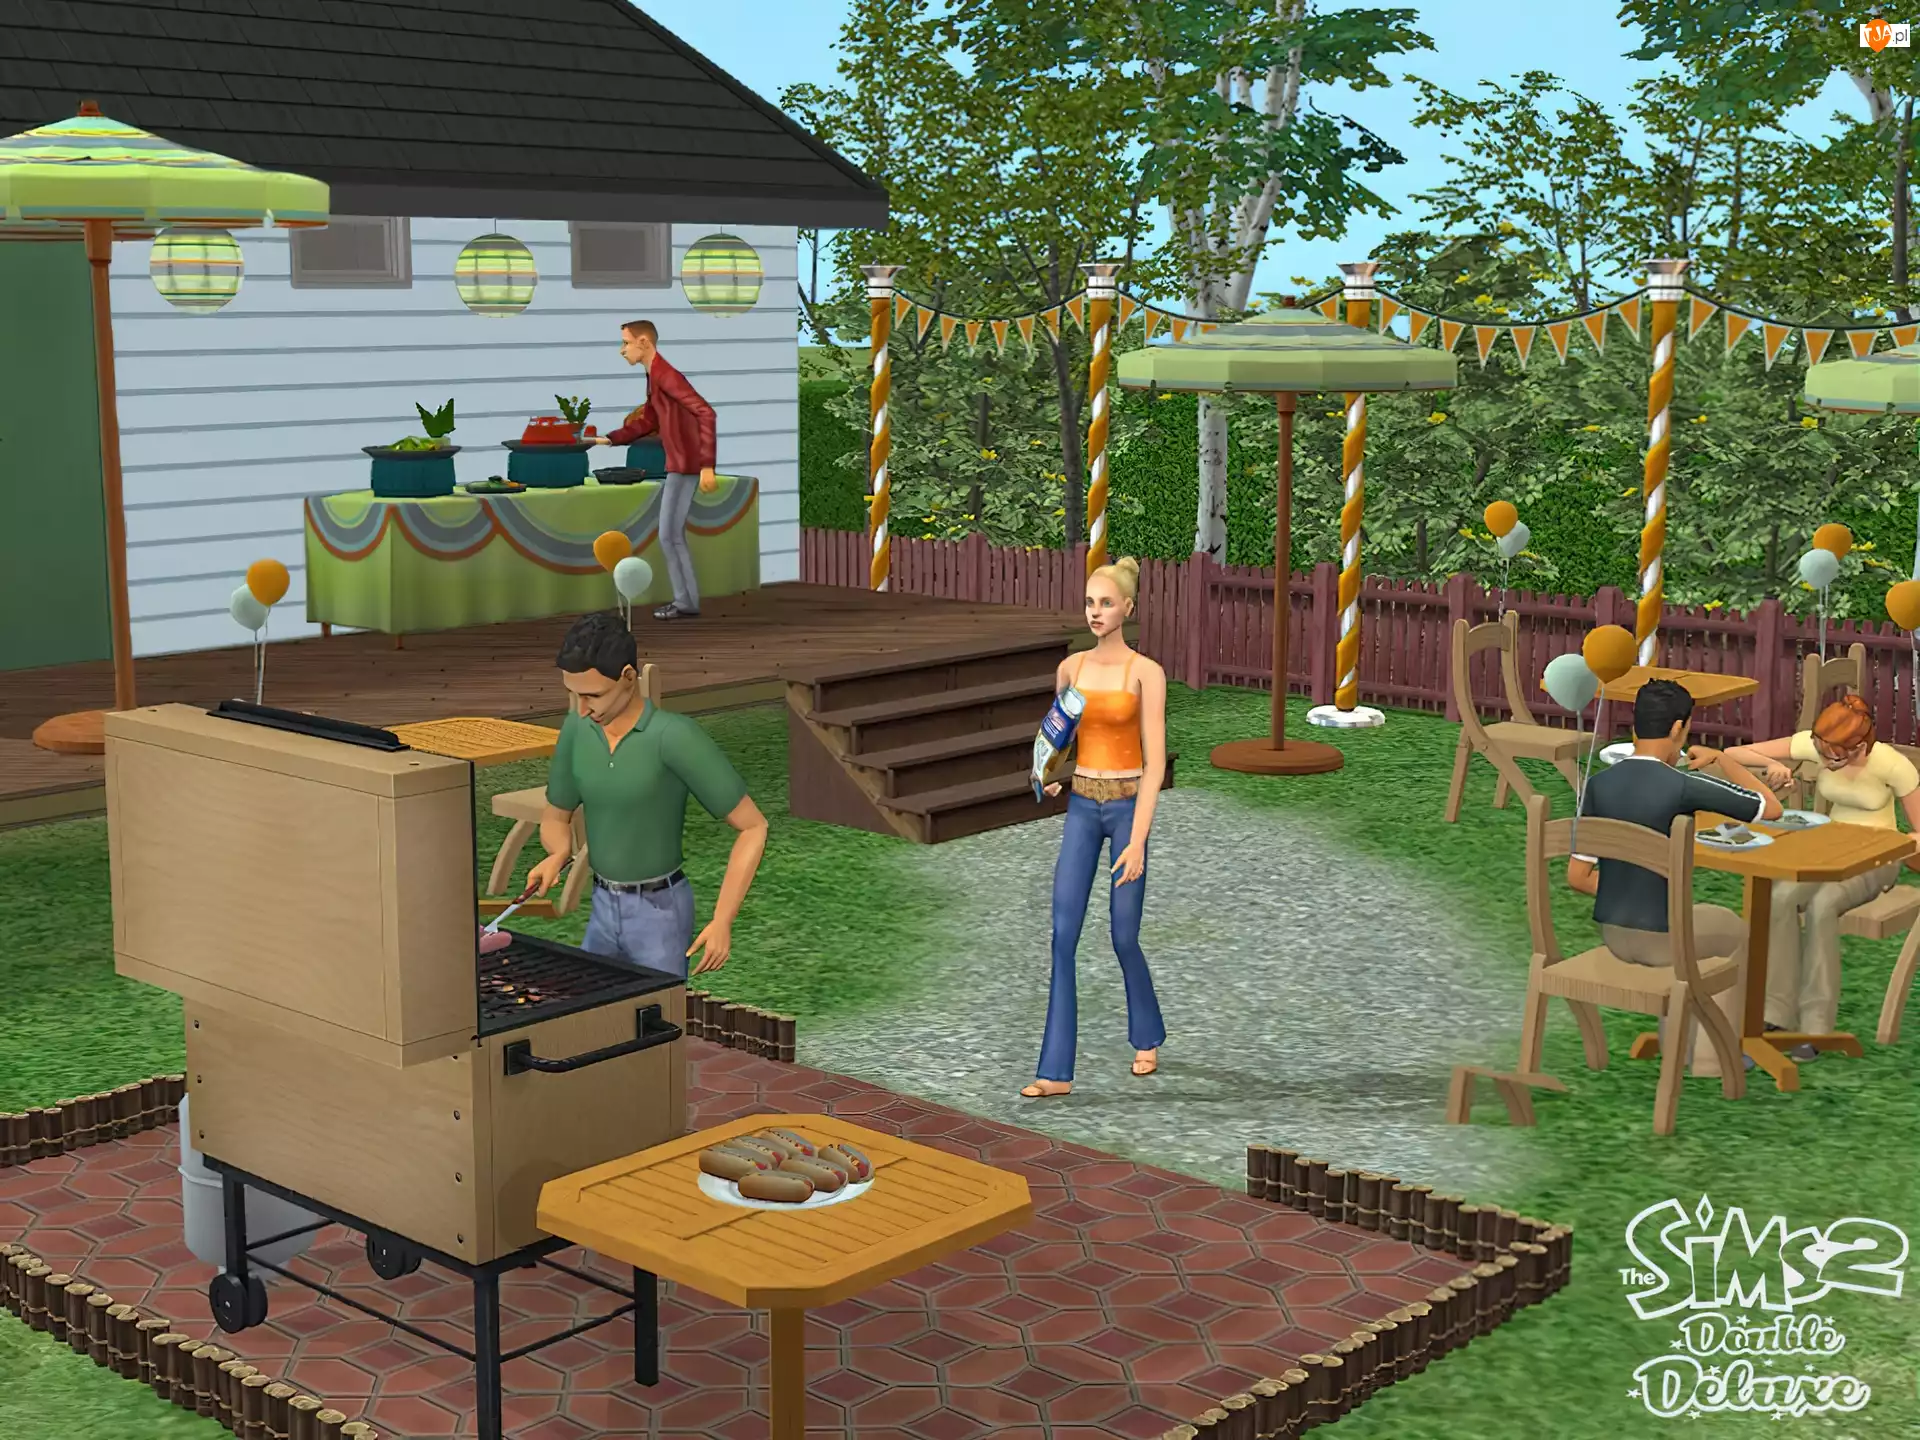 sims 2 deluxe crack free download